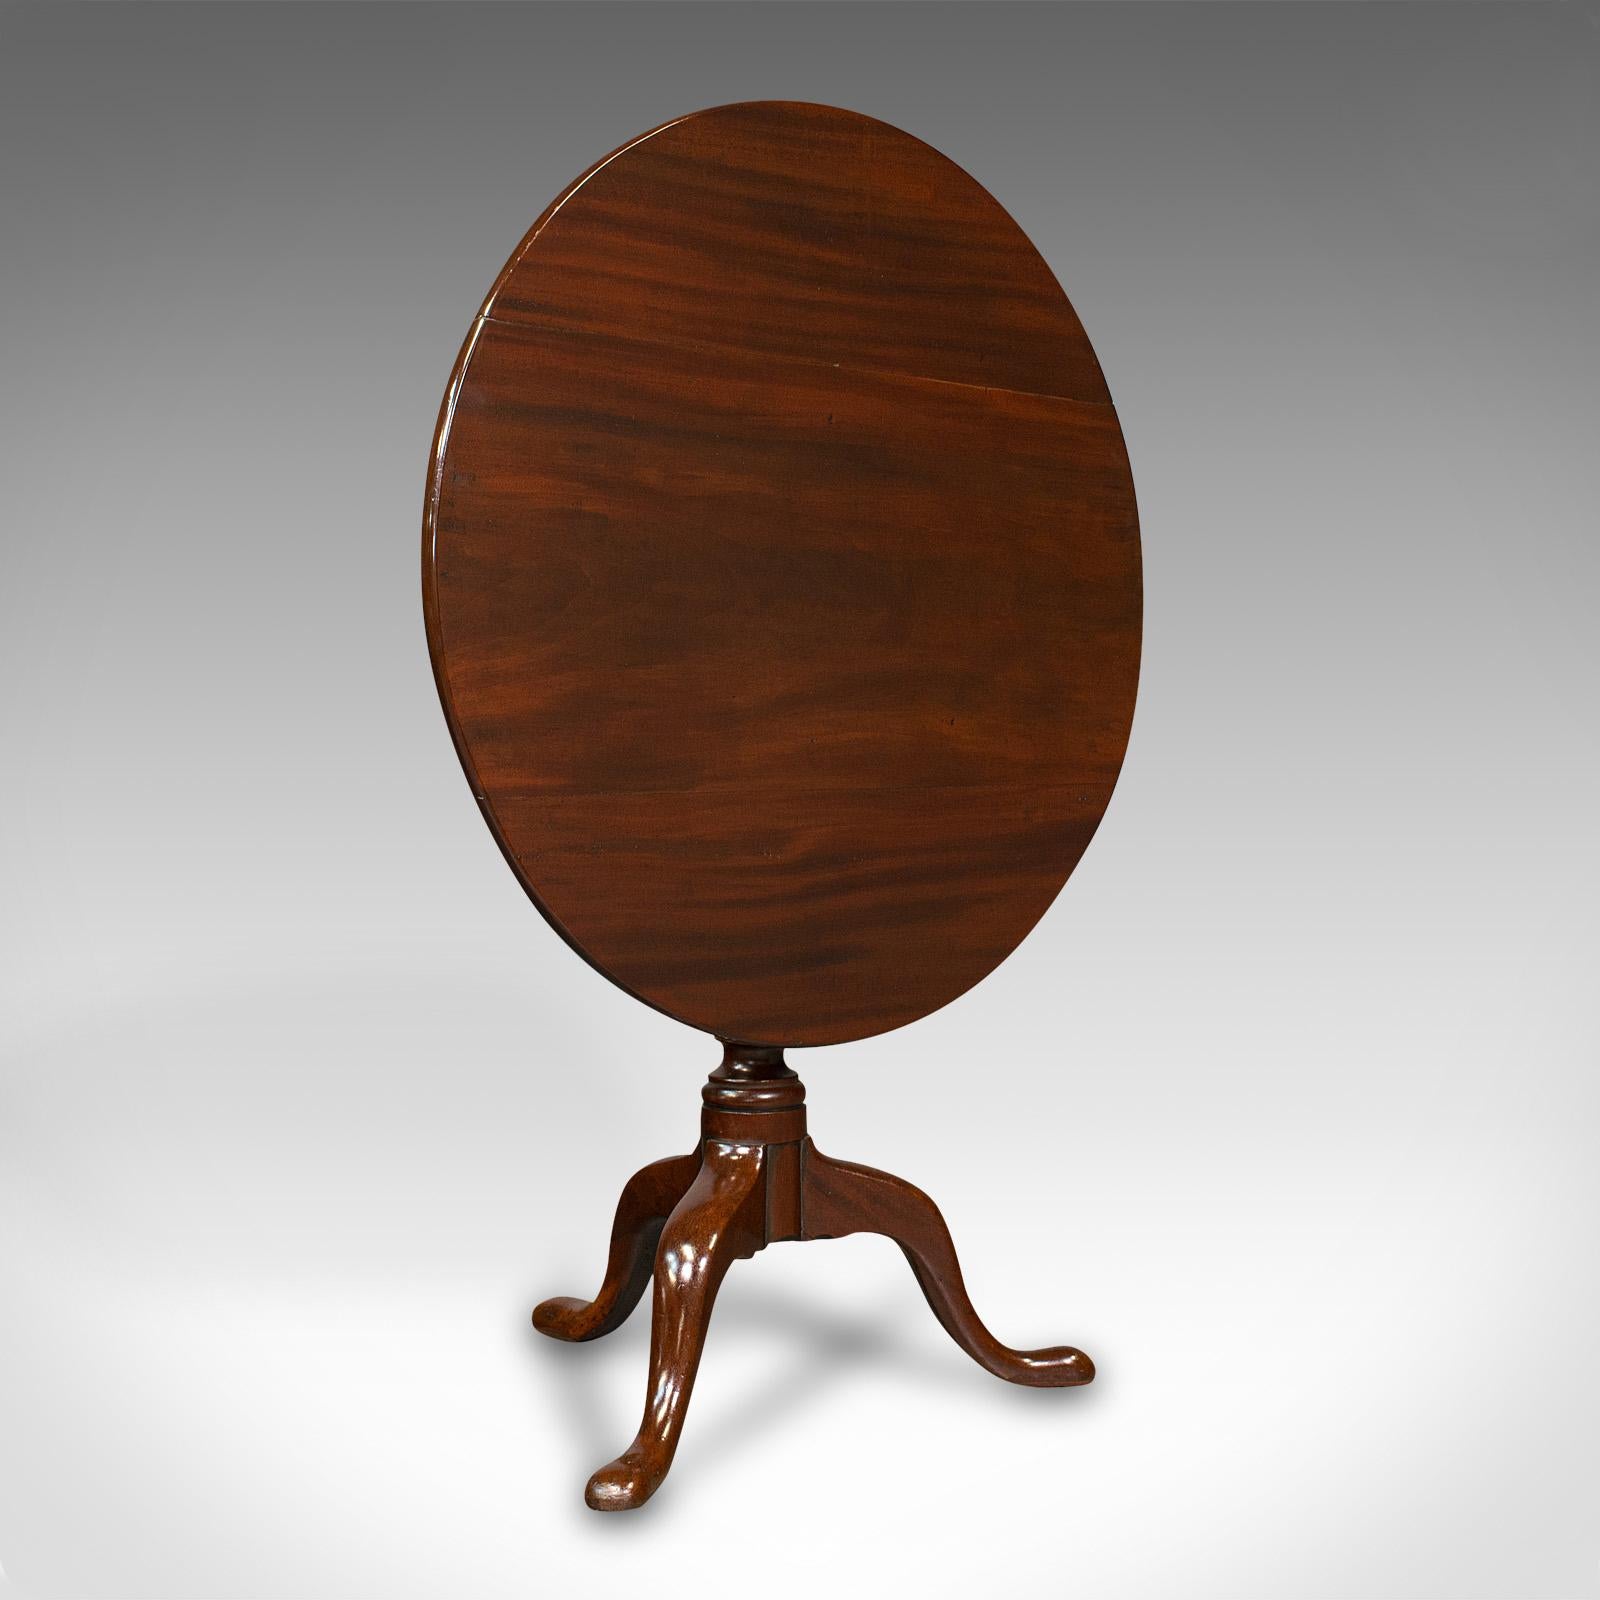 This is an antique tilt top occasional table. An English, mahogany side or lamp table, dating to the Georgian period, circa 1800.

Beautifully presented Georgian table
Displays a desirable aged patina and in good order
Quality stocks show fine